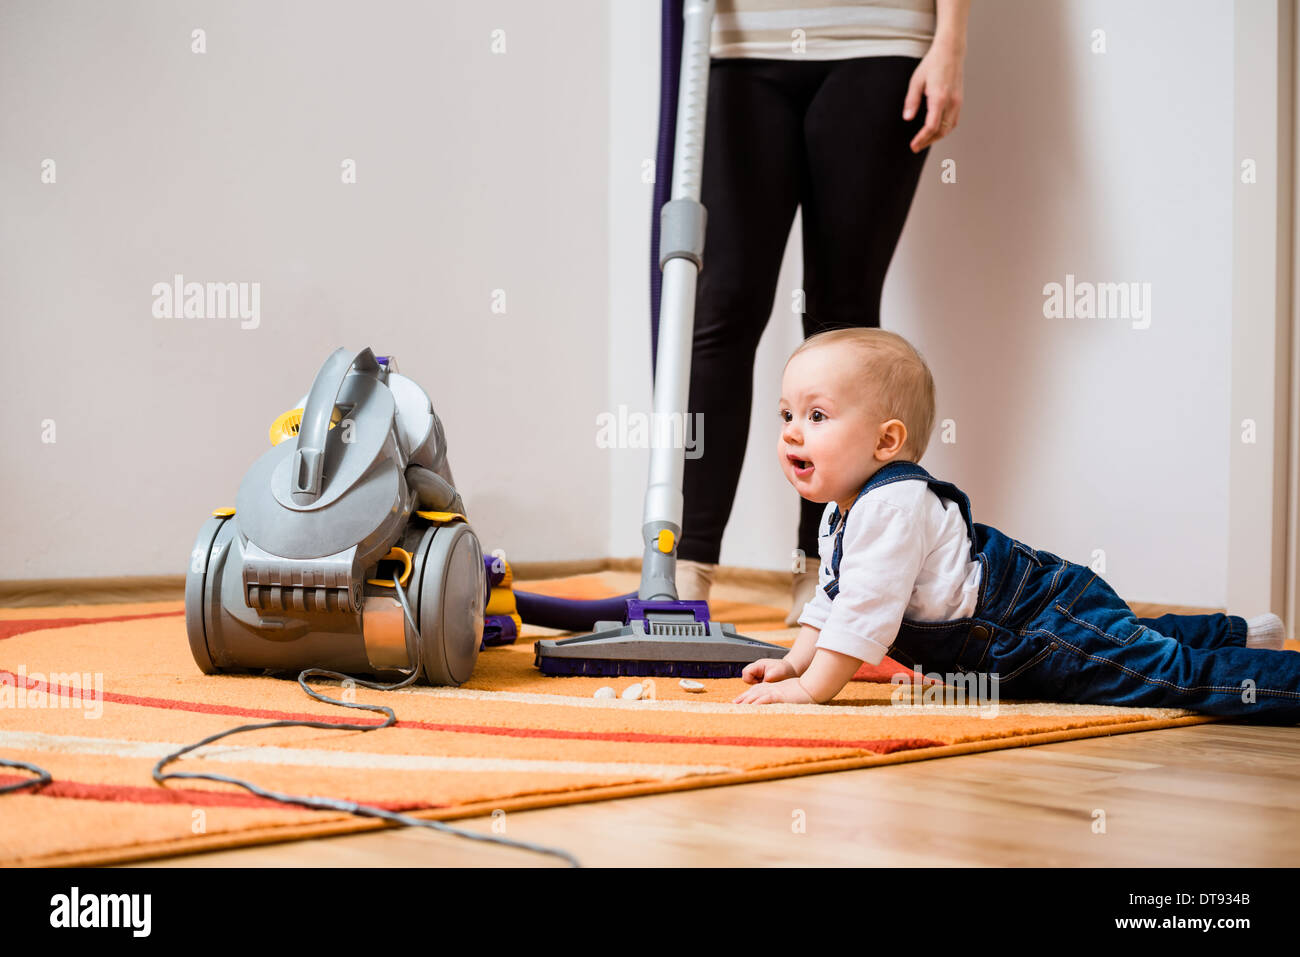 Cleaning up the room - woman with vacuum cleaner, baby sitting on floor Stock Photo